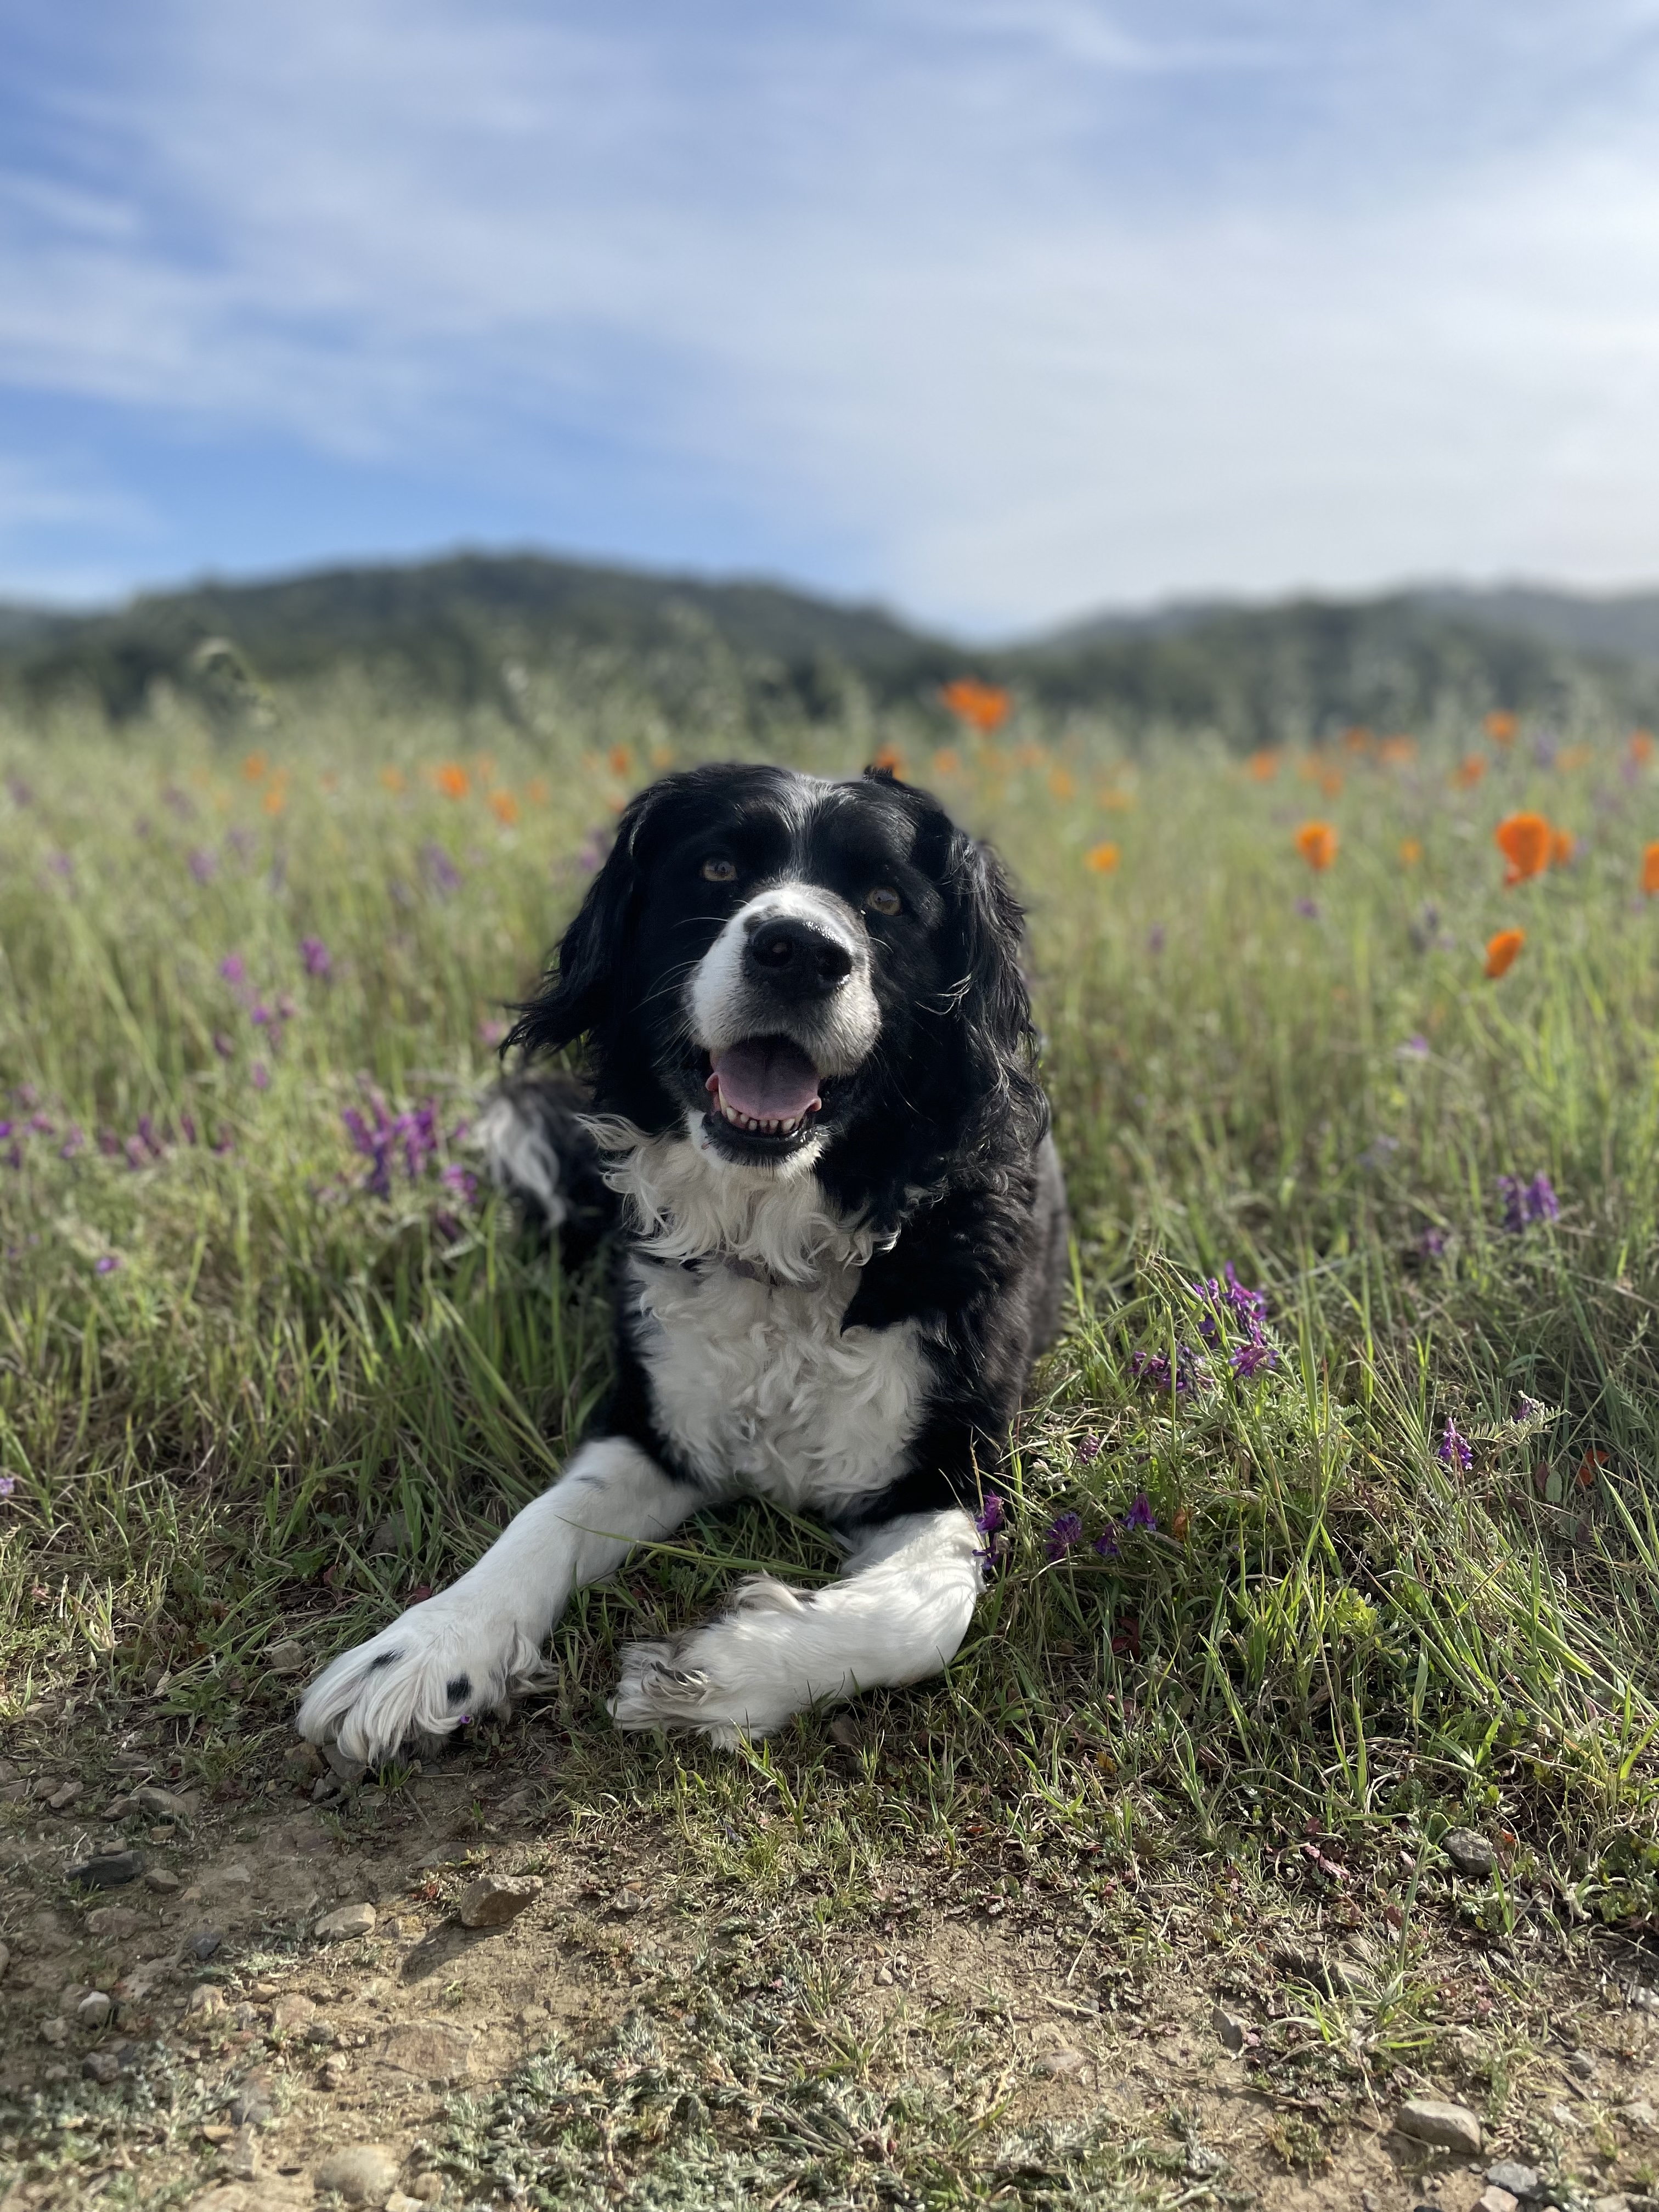 Dog sitting in a field of flowers